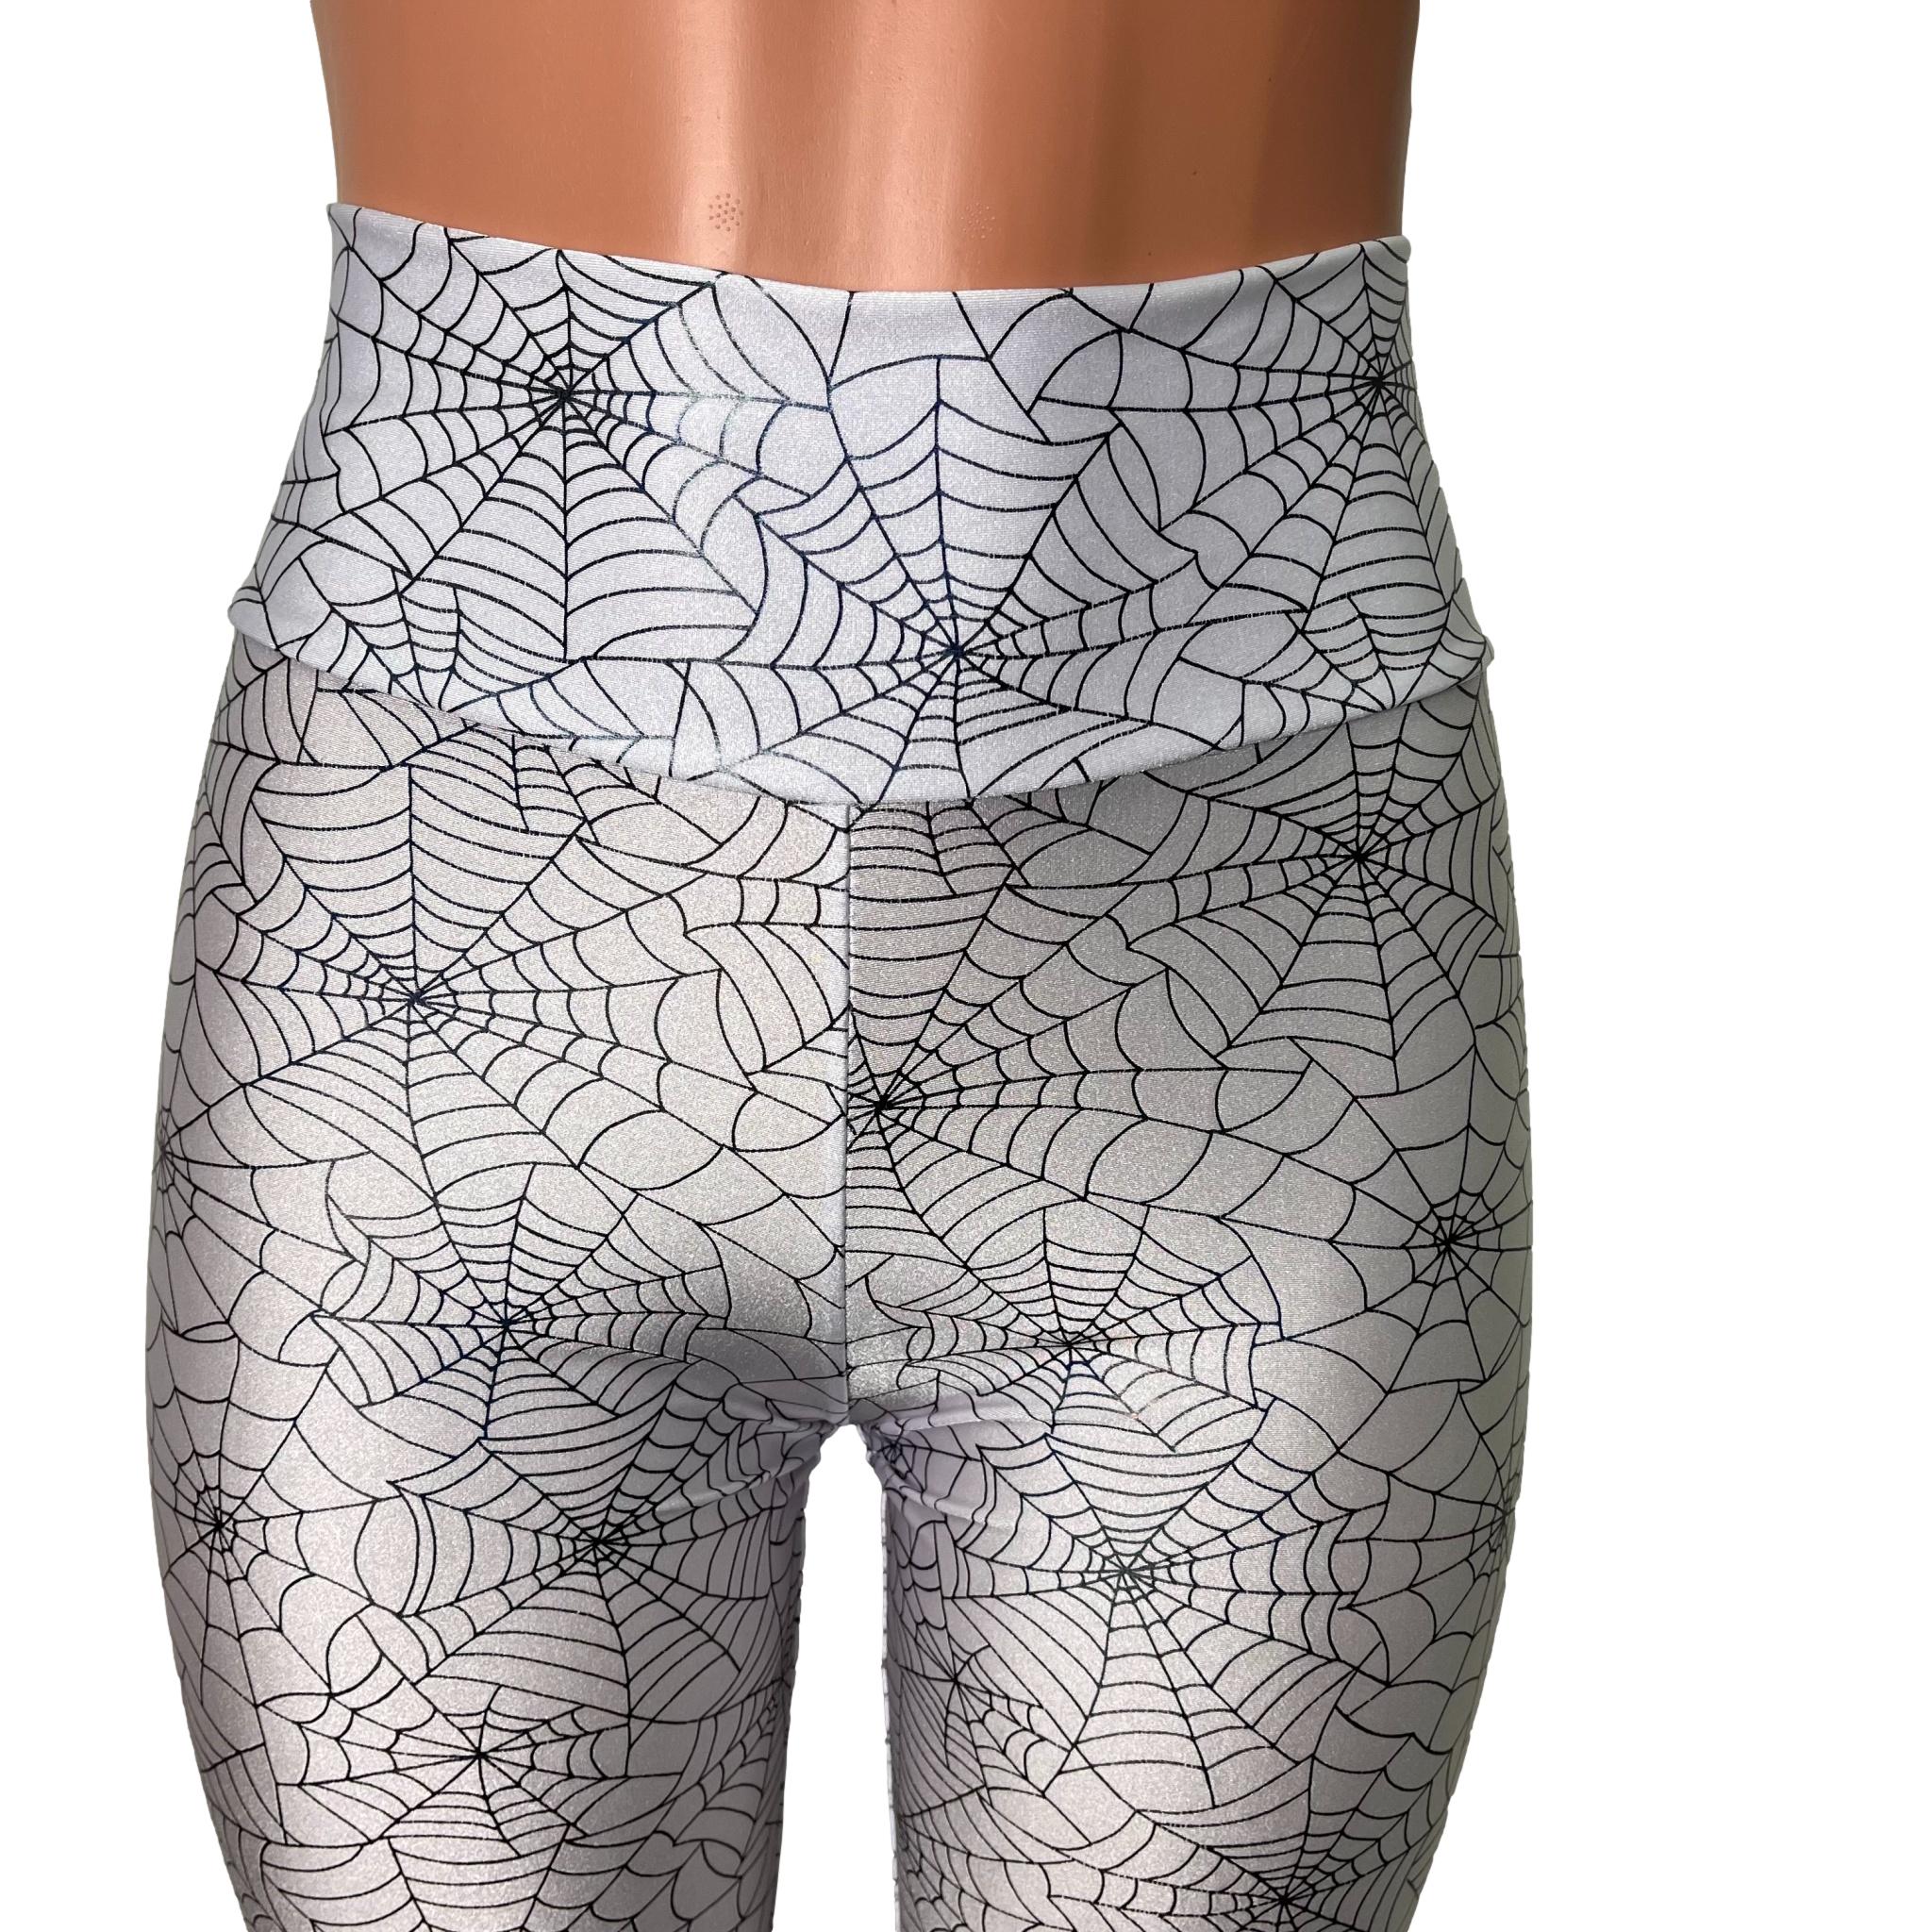 Spider Web Glow in The Dark Women's High Waisted Yoga Pants Fitness Tight  Trousers Sports Capri Leggings Skinny Pants White at  Women's  Clothing store